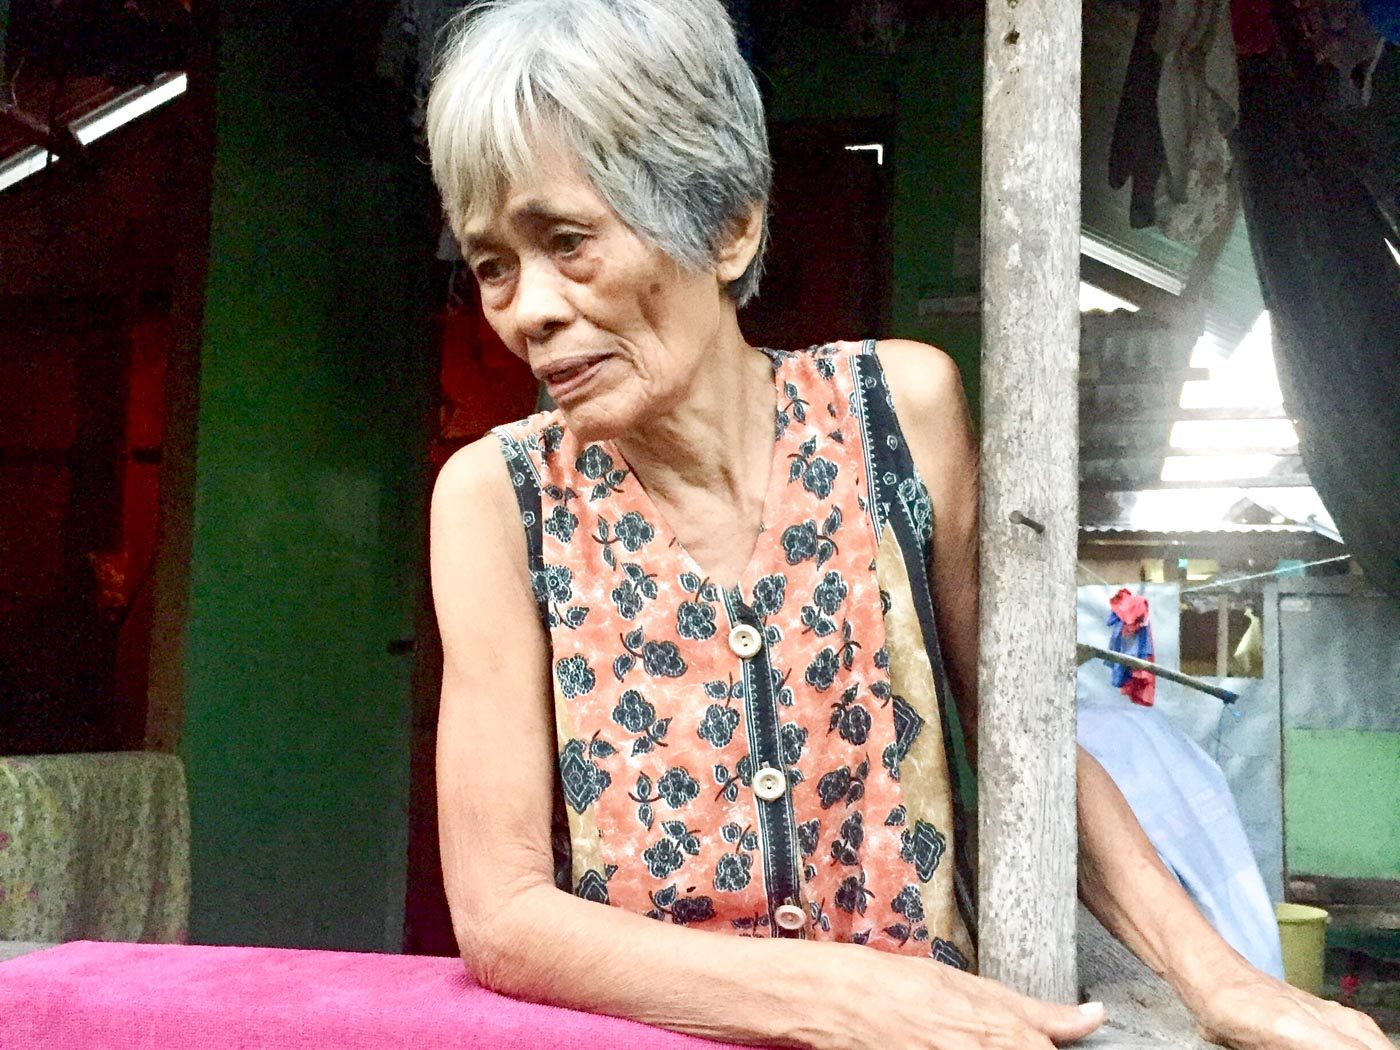 IN PHOTOS: 4 years on, Yolanda survivors remember their loved ones